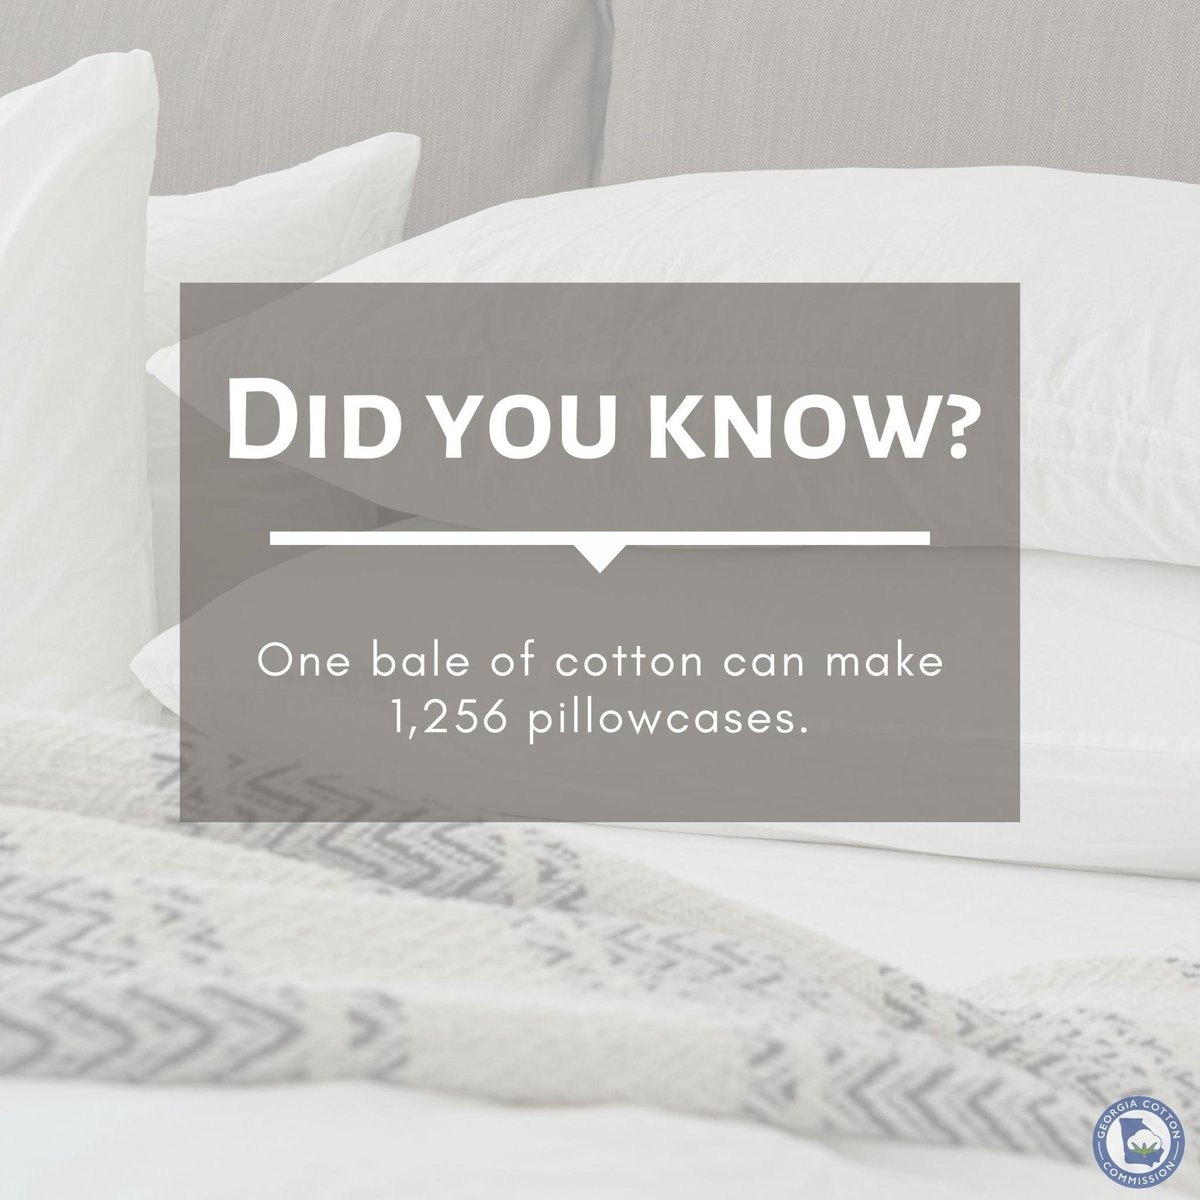 Happy Friday! Did you know that one bale of cotton can make 1,256 pillowcases?